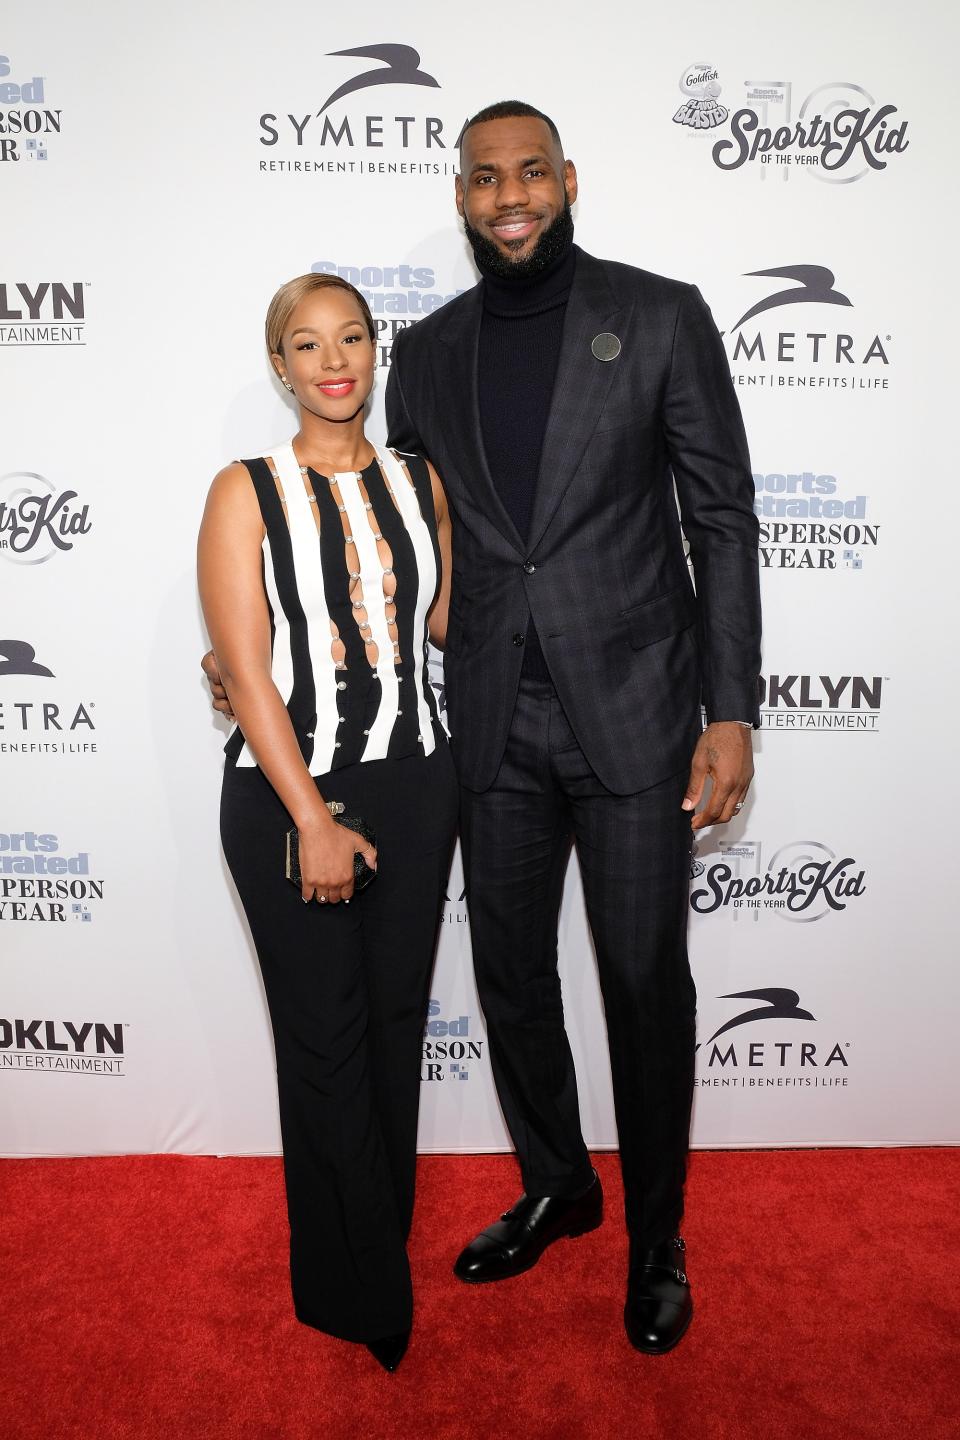 Savannah James, at left, and LeBron James attend the 2016 Sports Illustrated Sportsperson of the Year at Barclays Center of Brooklyn on December 12, 2016 in the Brooklyn. 